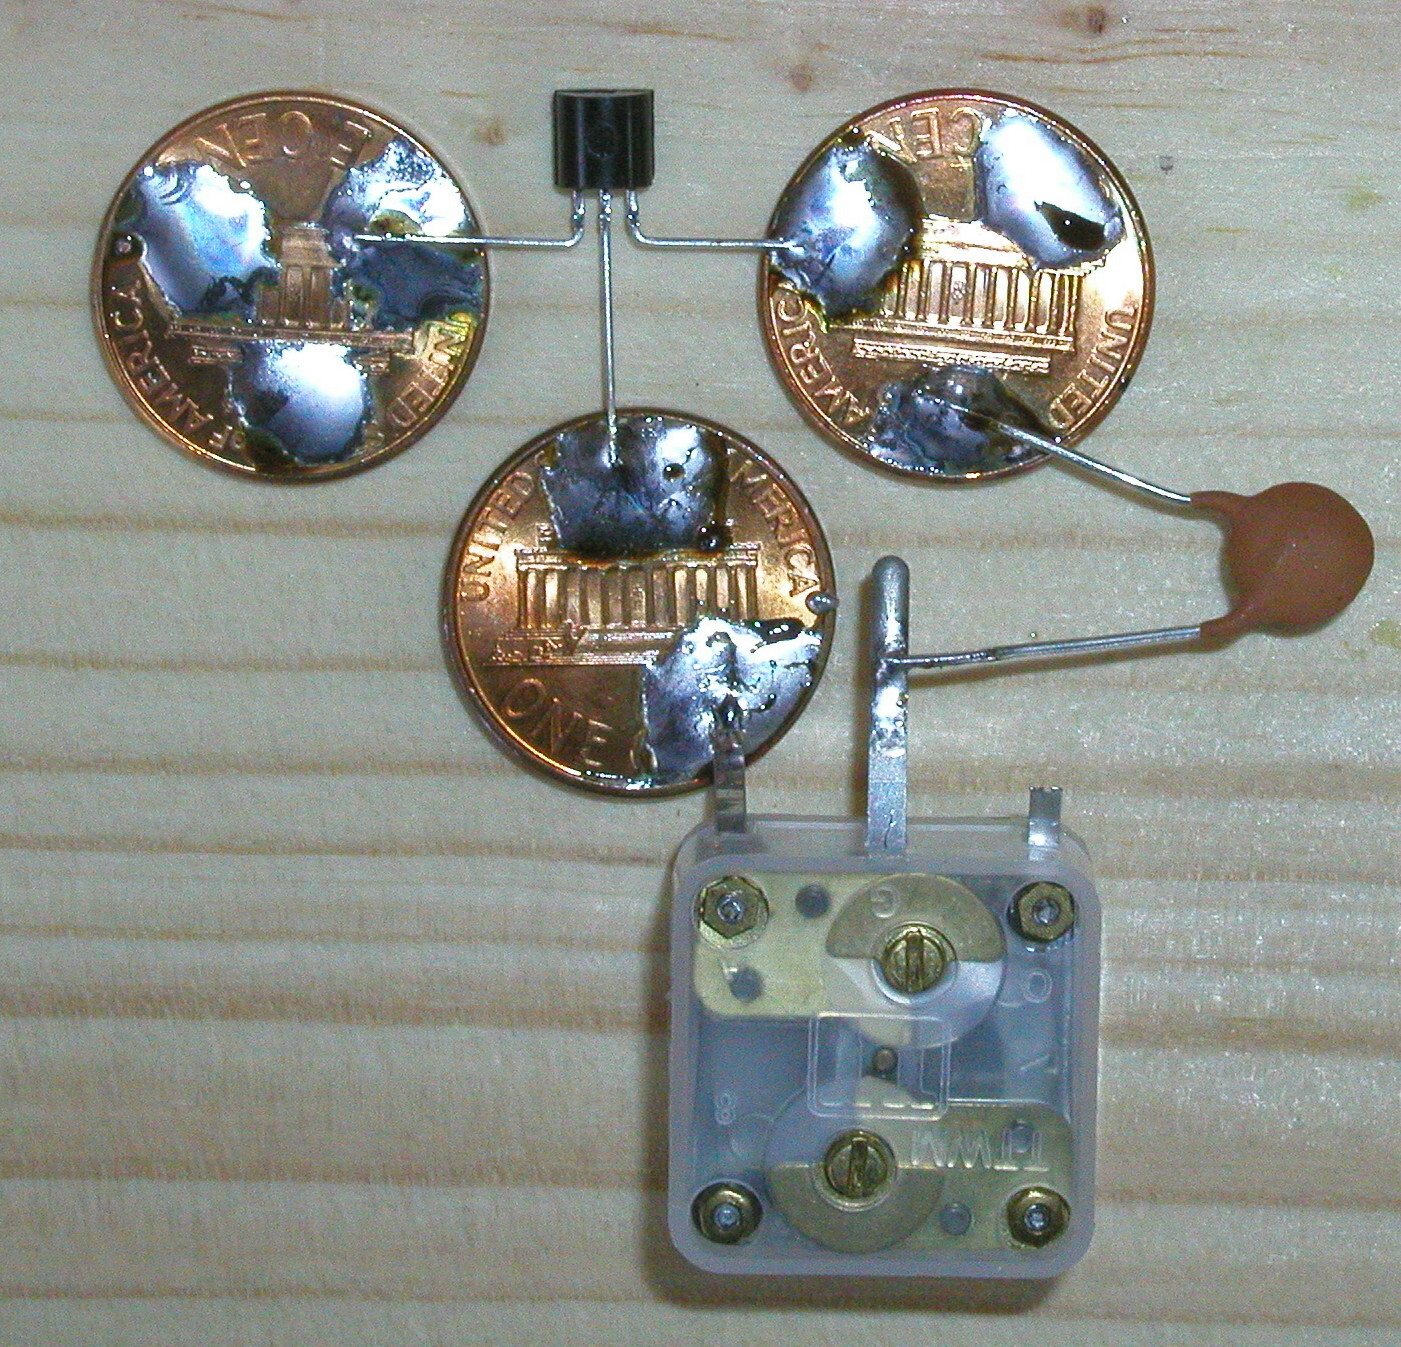 Small capacitor